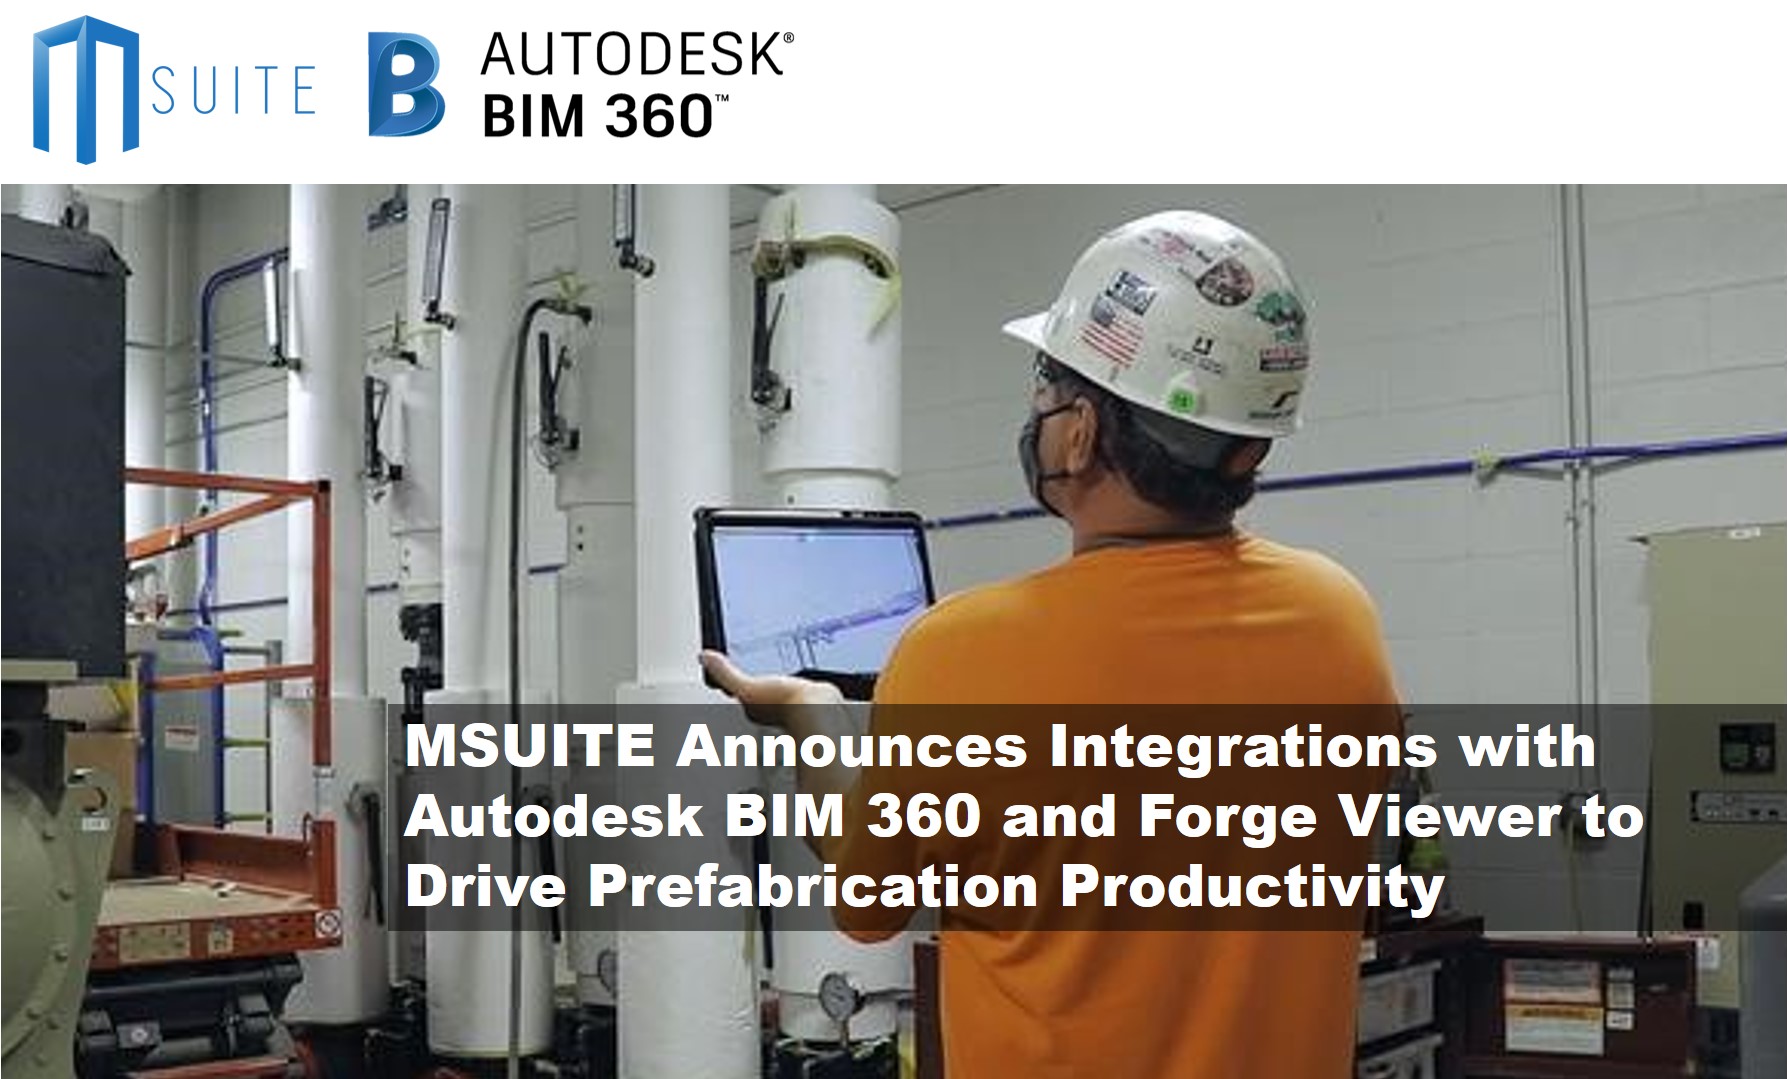 MSUITE Integrates with Autodesk BIM 360 and Forge Viewer